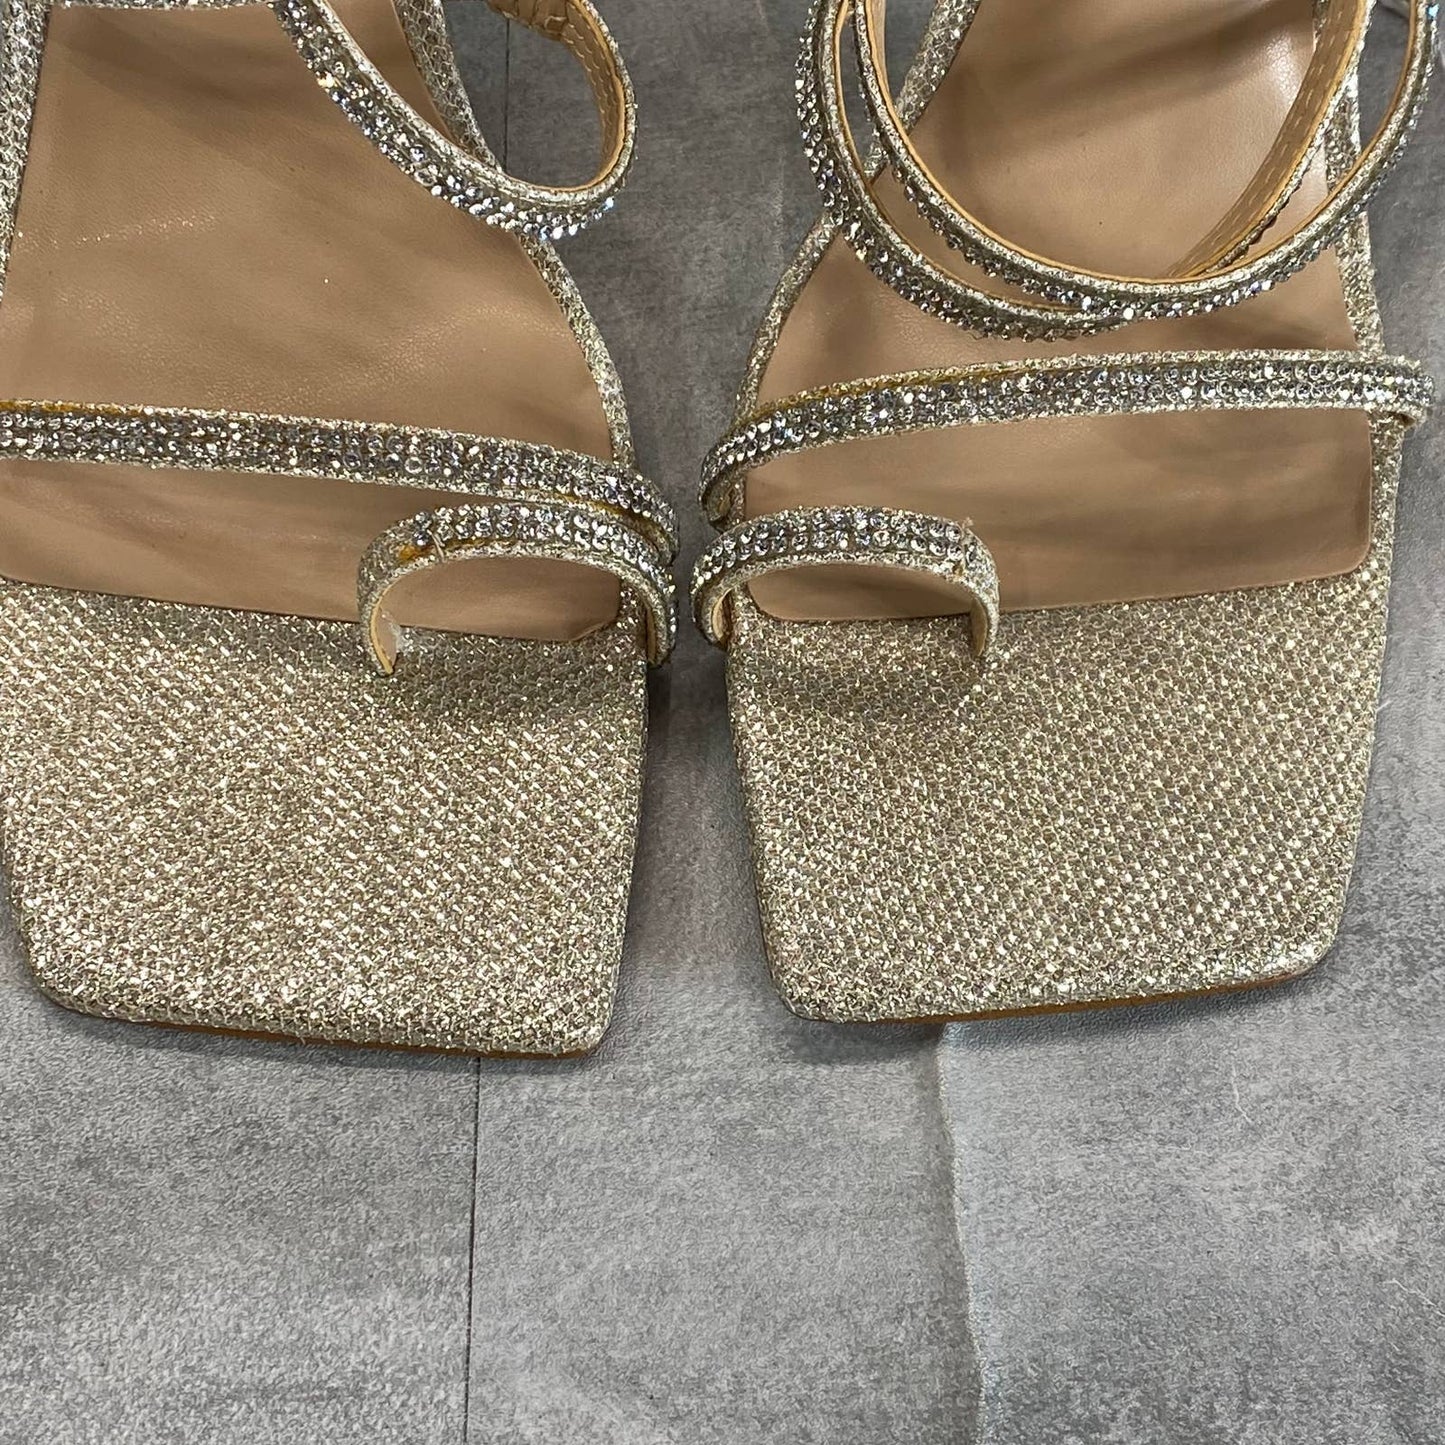 INC INTERNATIONAL CONCEPTS Women's Champagne Crystal Arti Strappy Sandals SZ 9.5